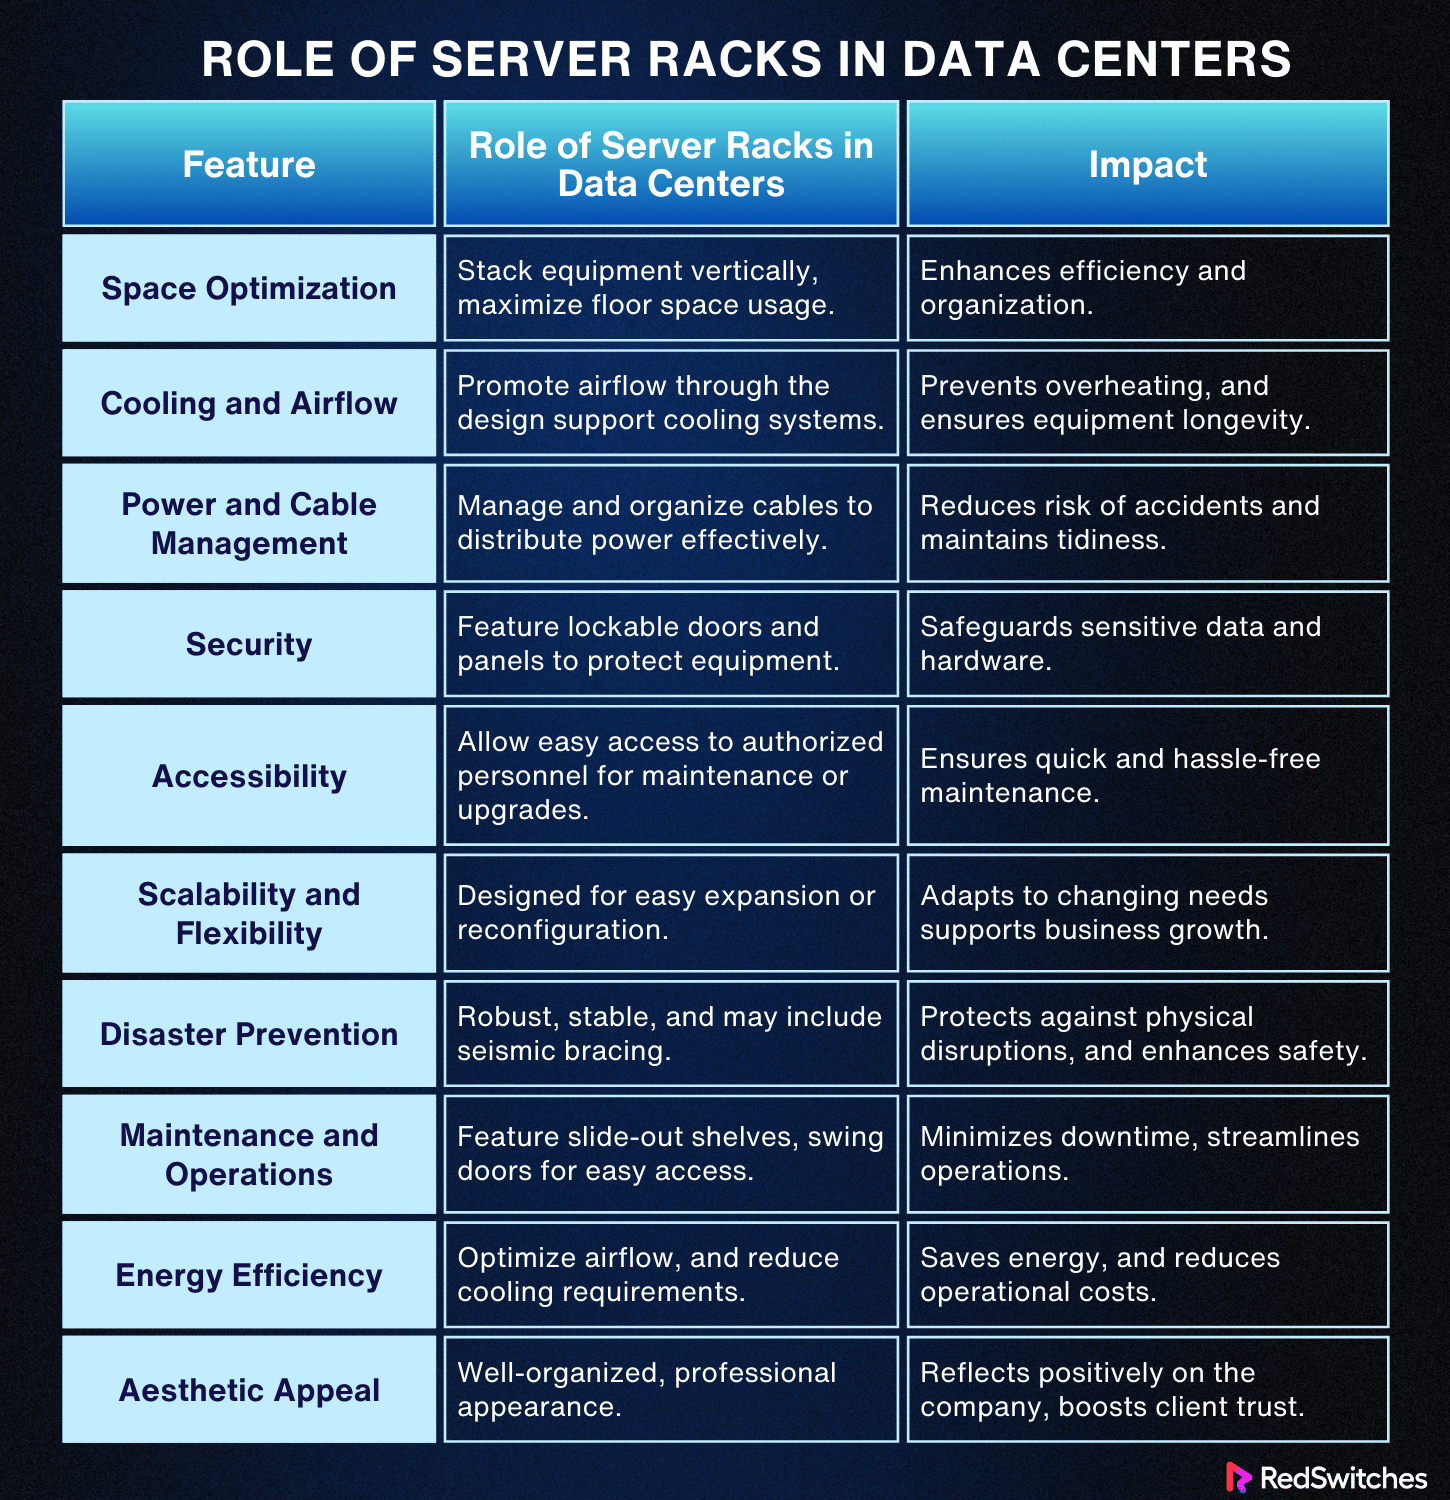 The Role of Server Racks in Data Centers